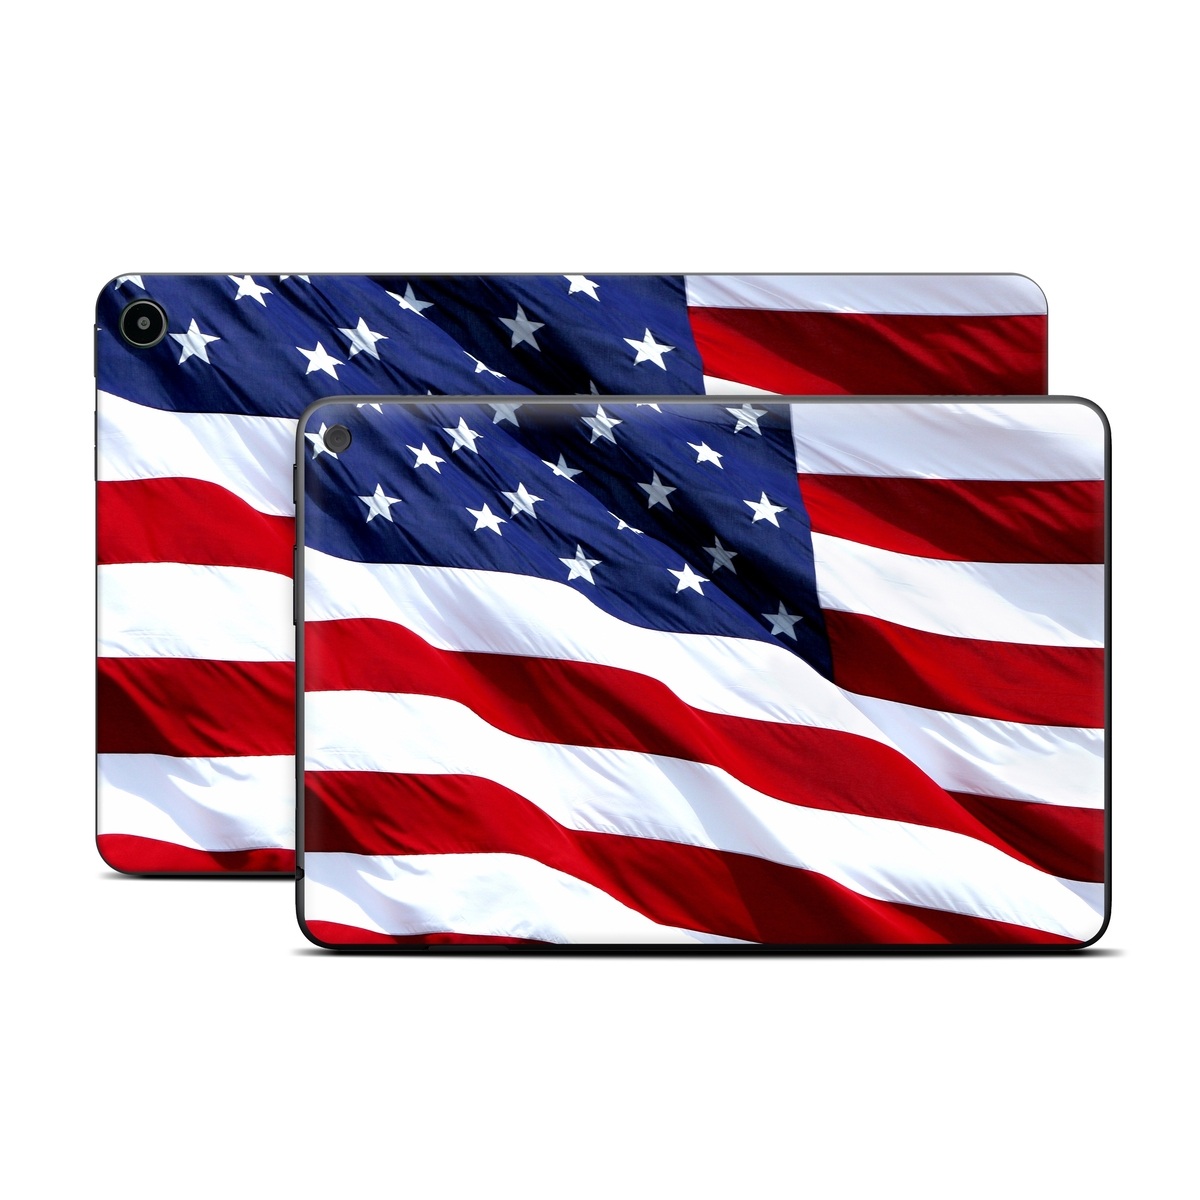 Amazon Fire Tablet Series Skin Skin design of Flag, Flag of the united states, Flag Day (USA), Veterans day, Memorial day, Holiday, Independence day, Event, with red, blue, white colors